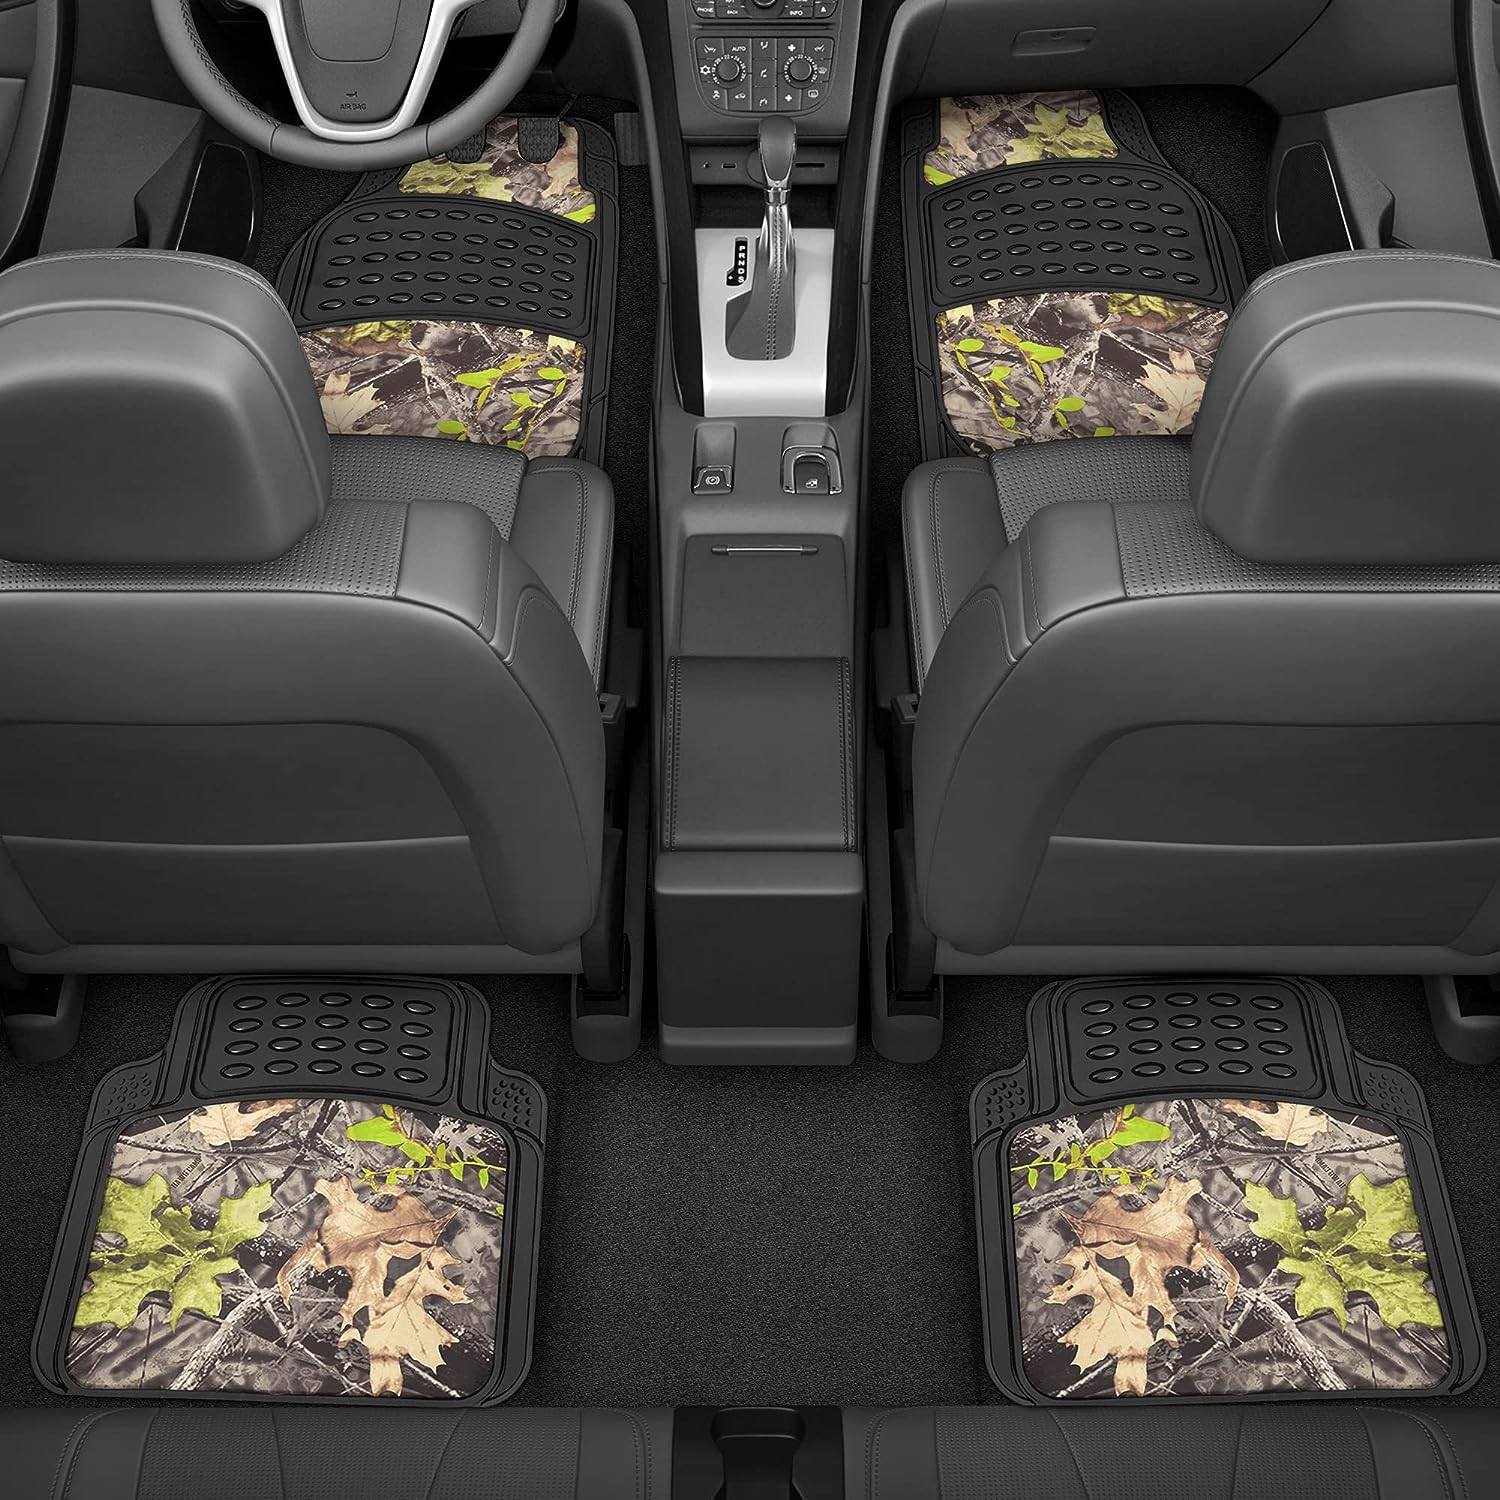 BDK Camouflage 4 Piece All Weather Waterproof Rubber Car Floor Mats - Fit Most Car Truck SUV, Trimmable, Heavy Duty - MT-684-CM